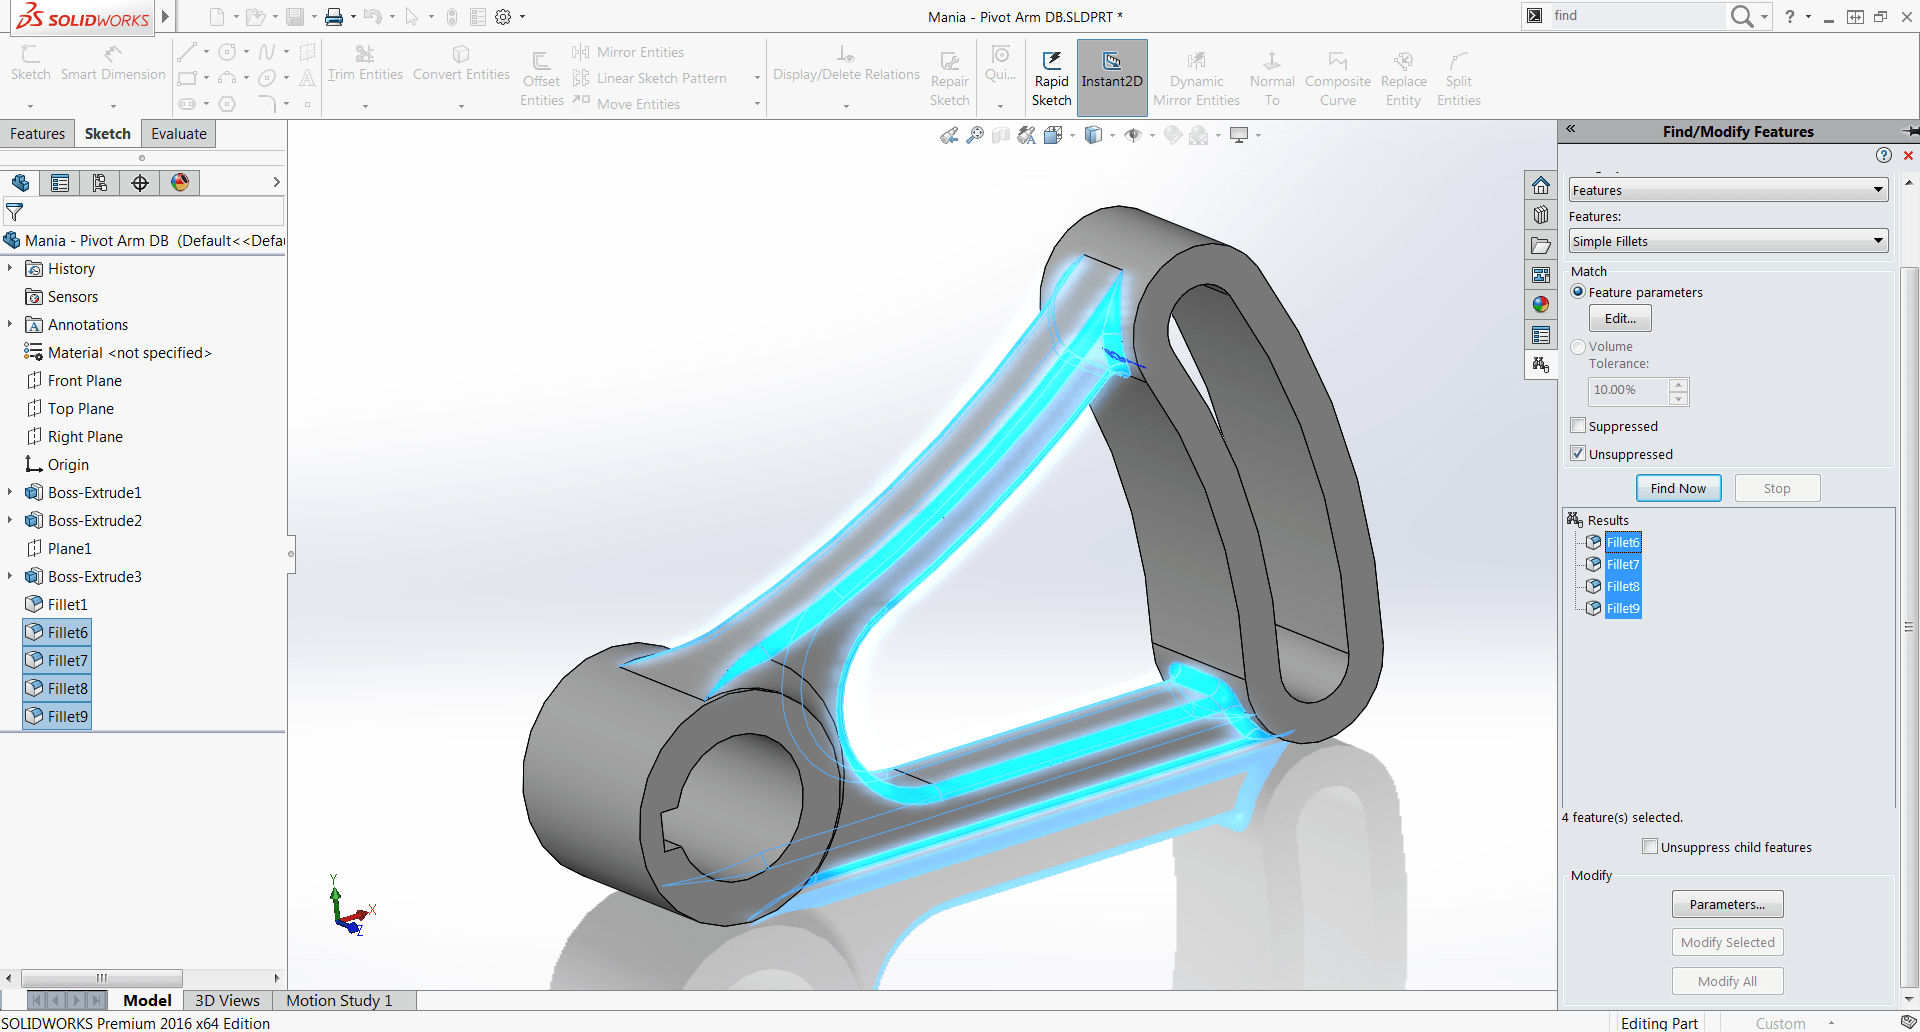 solidworks-findmodify-features-changing-multiple-features-at-onceimage009